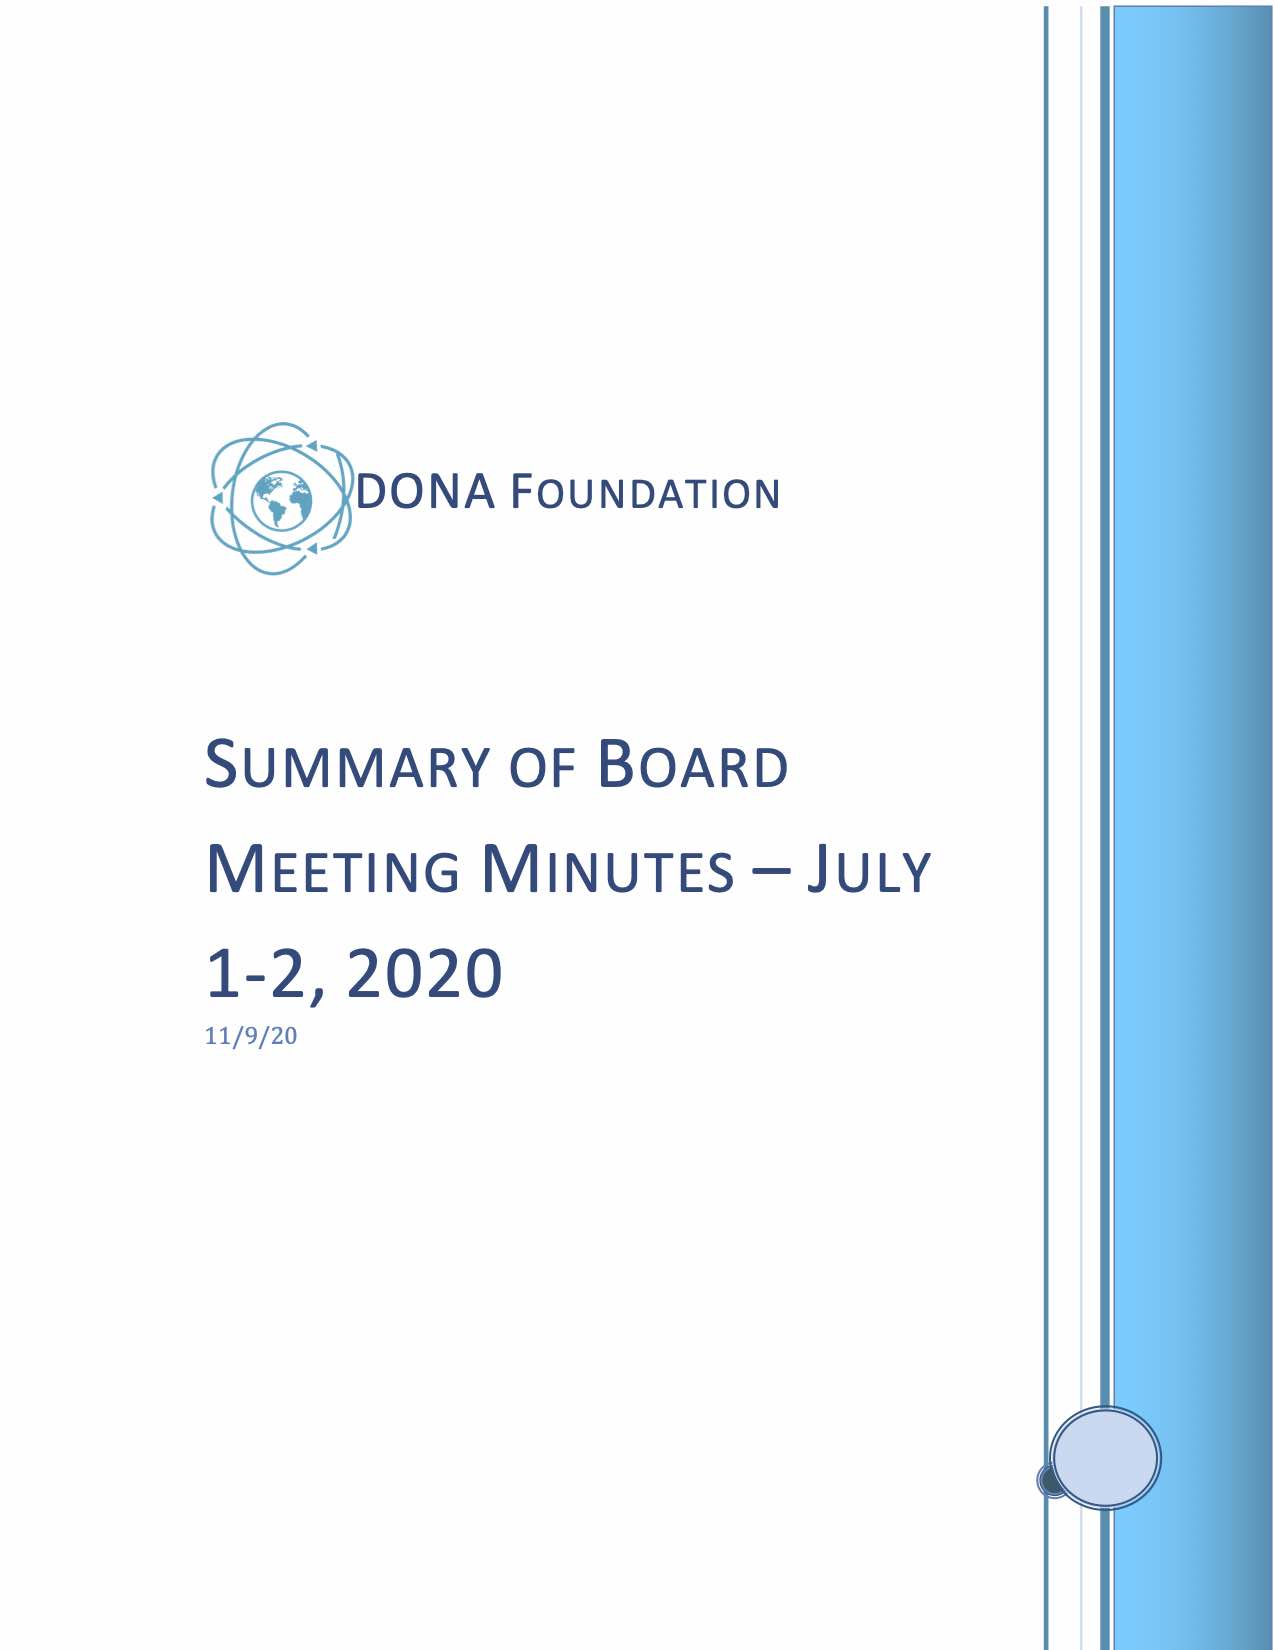 Summary of Board Minutes July 1-2, 2020